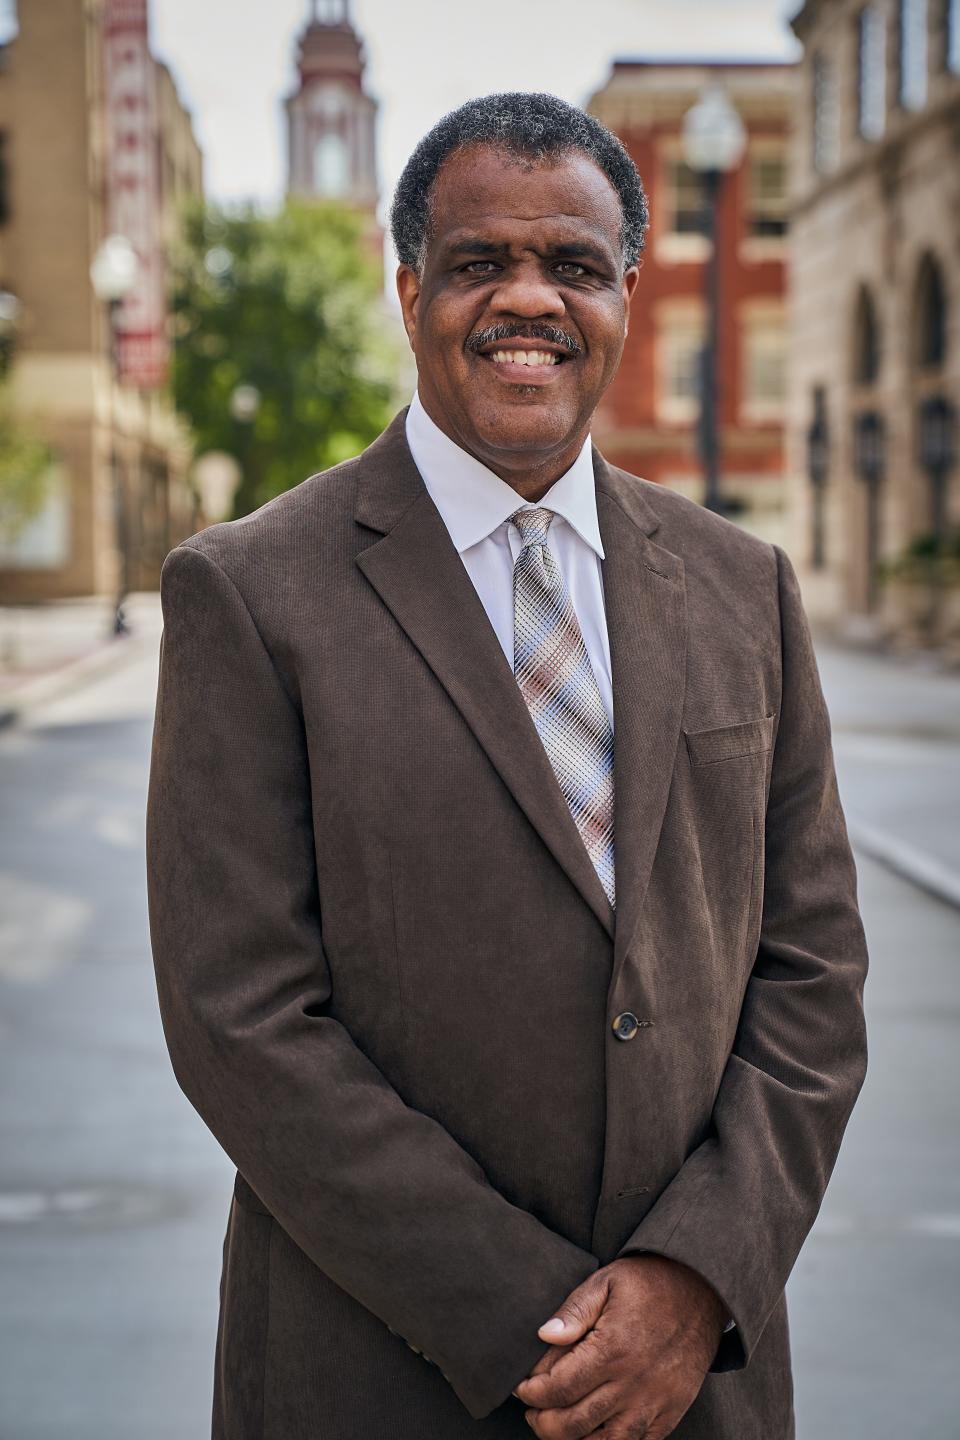 State Rep. Sam McKenzie, a Democrat who represents Knoxville’s 15th District, is making plans as chairman of the Tennessee Black Caucus for the group to tour the state, including Knoxville, in June.